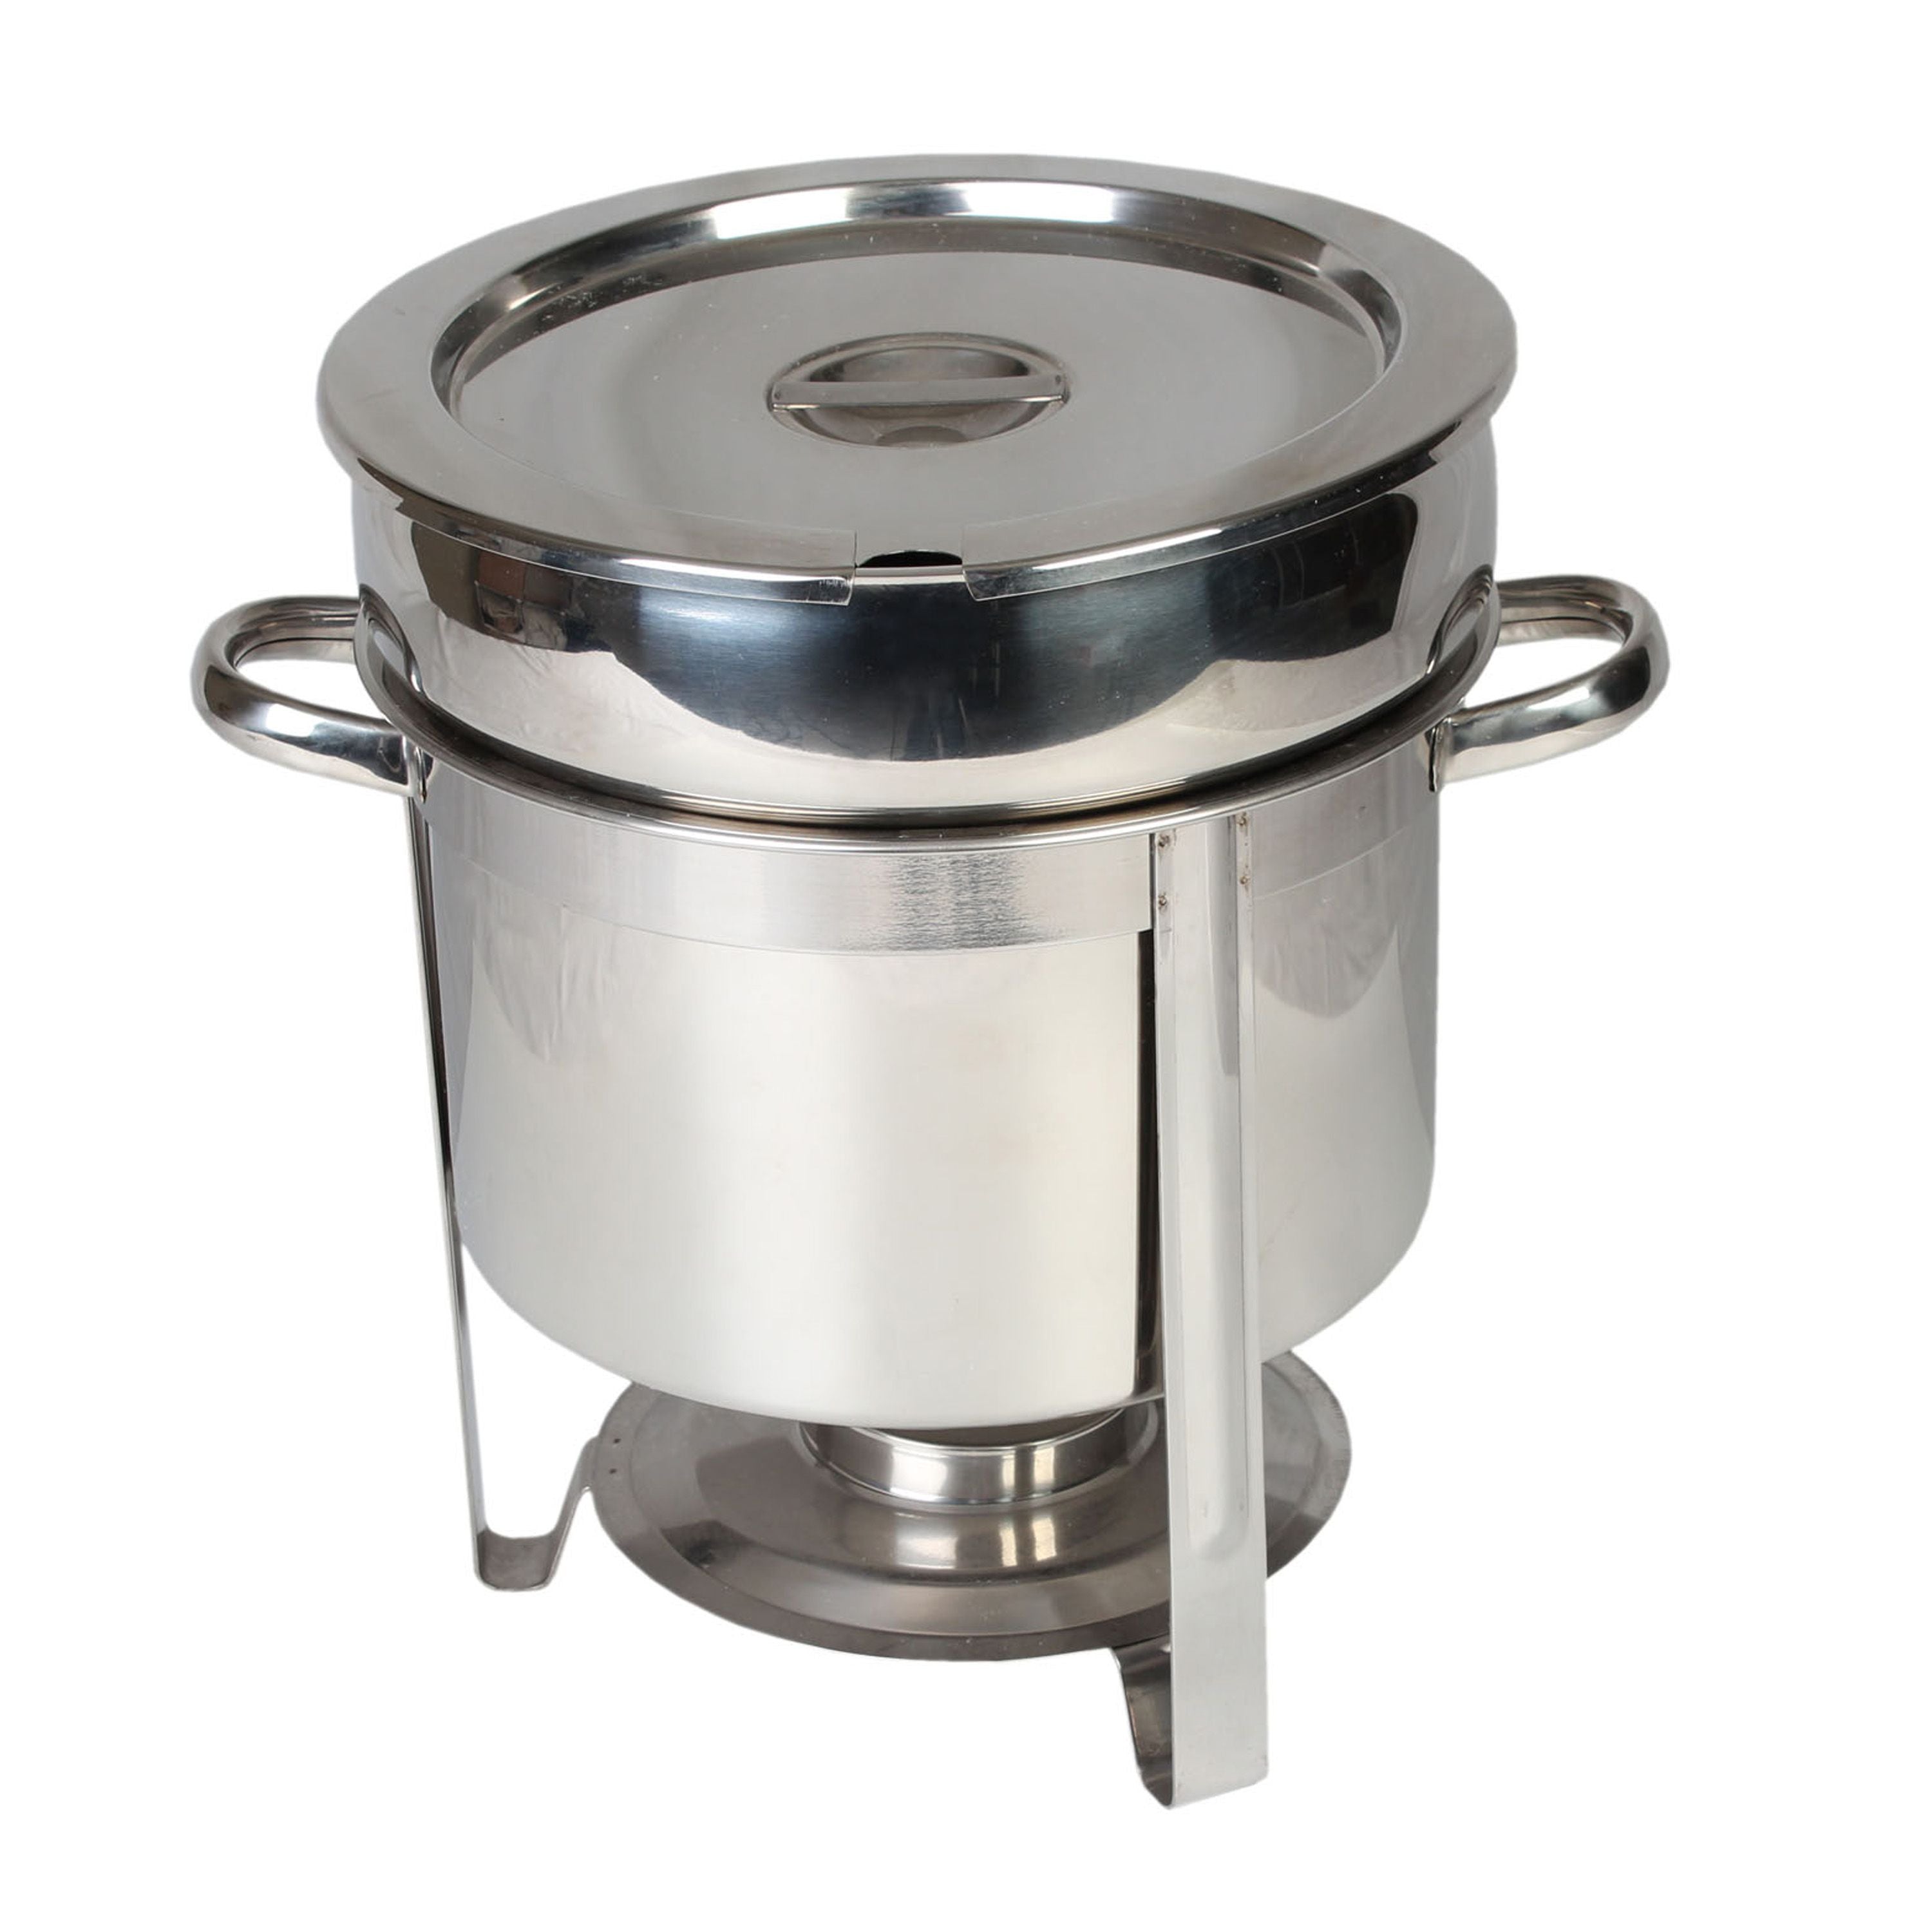 Thunder Group SLRCF8311 Stainless Steel Marmite Chafer, 11 Qt.